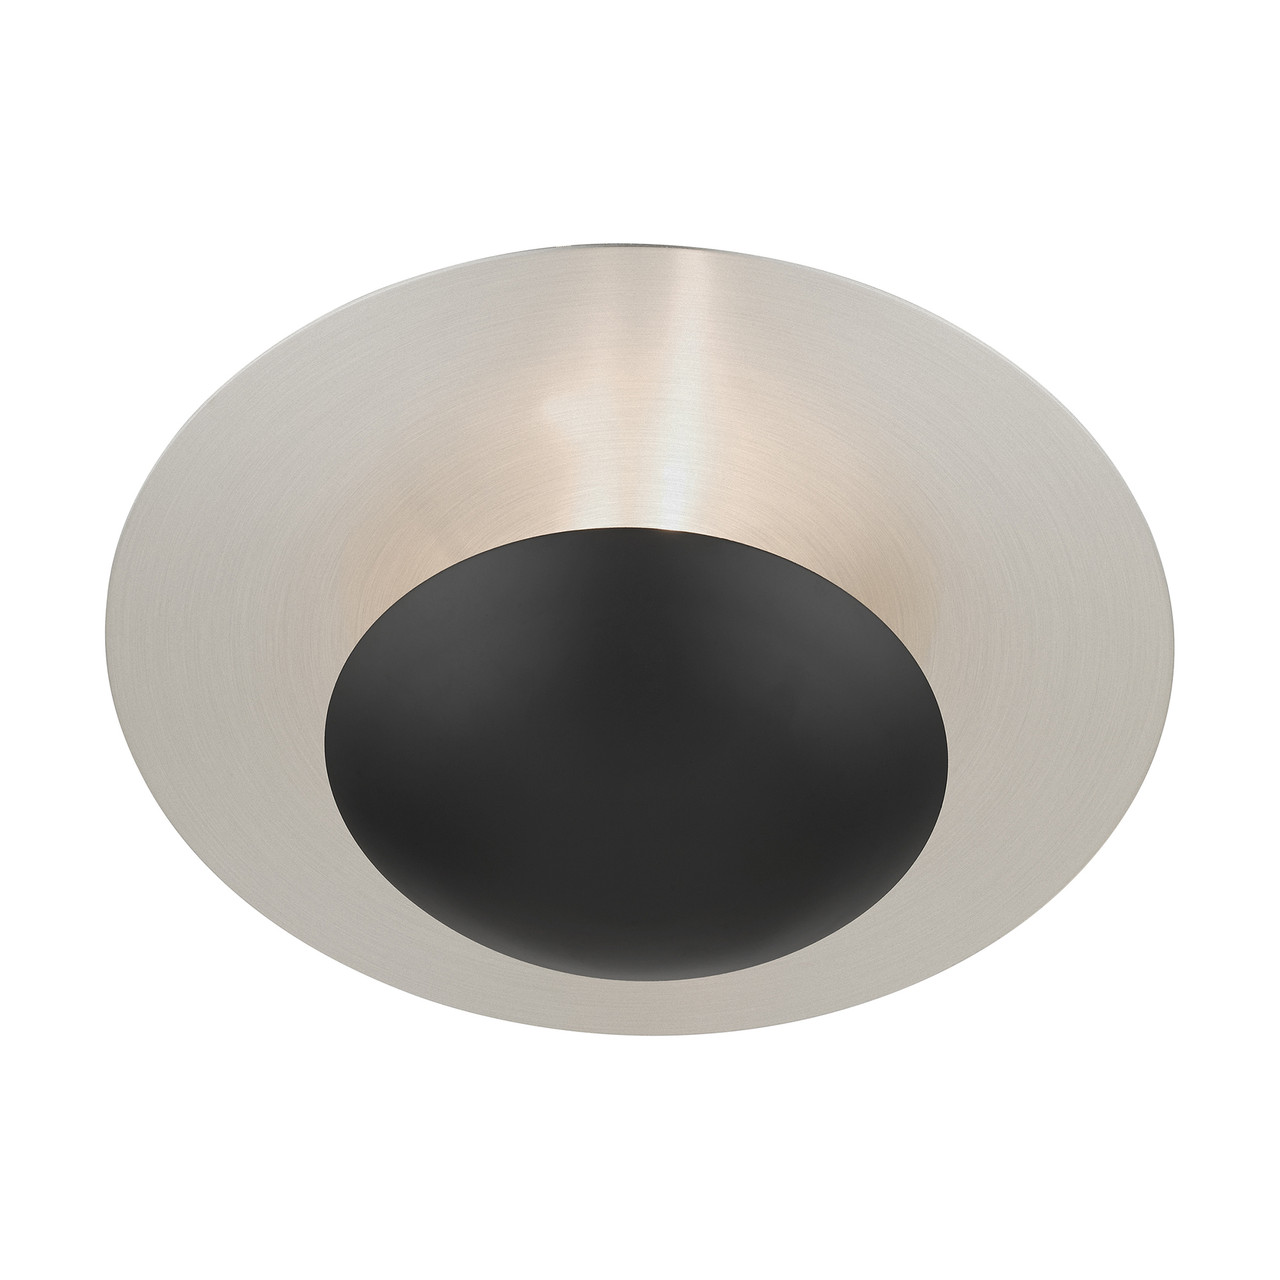 LIVEX LIGHTING 56570-04 2 Light Black Large Semi-Flush/ Wall Sconce with Brushed Nickel Reflector Backplate